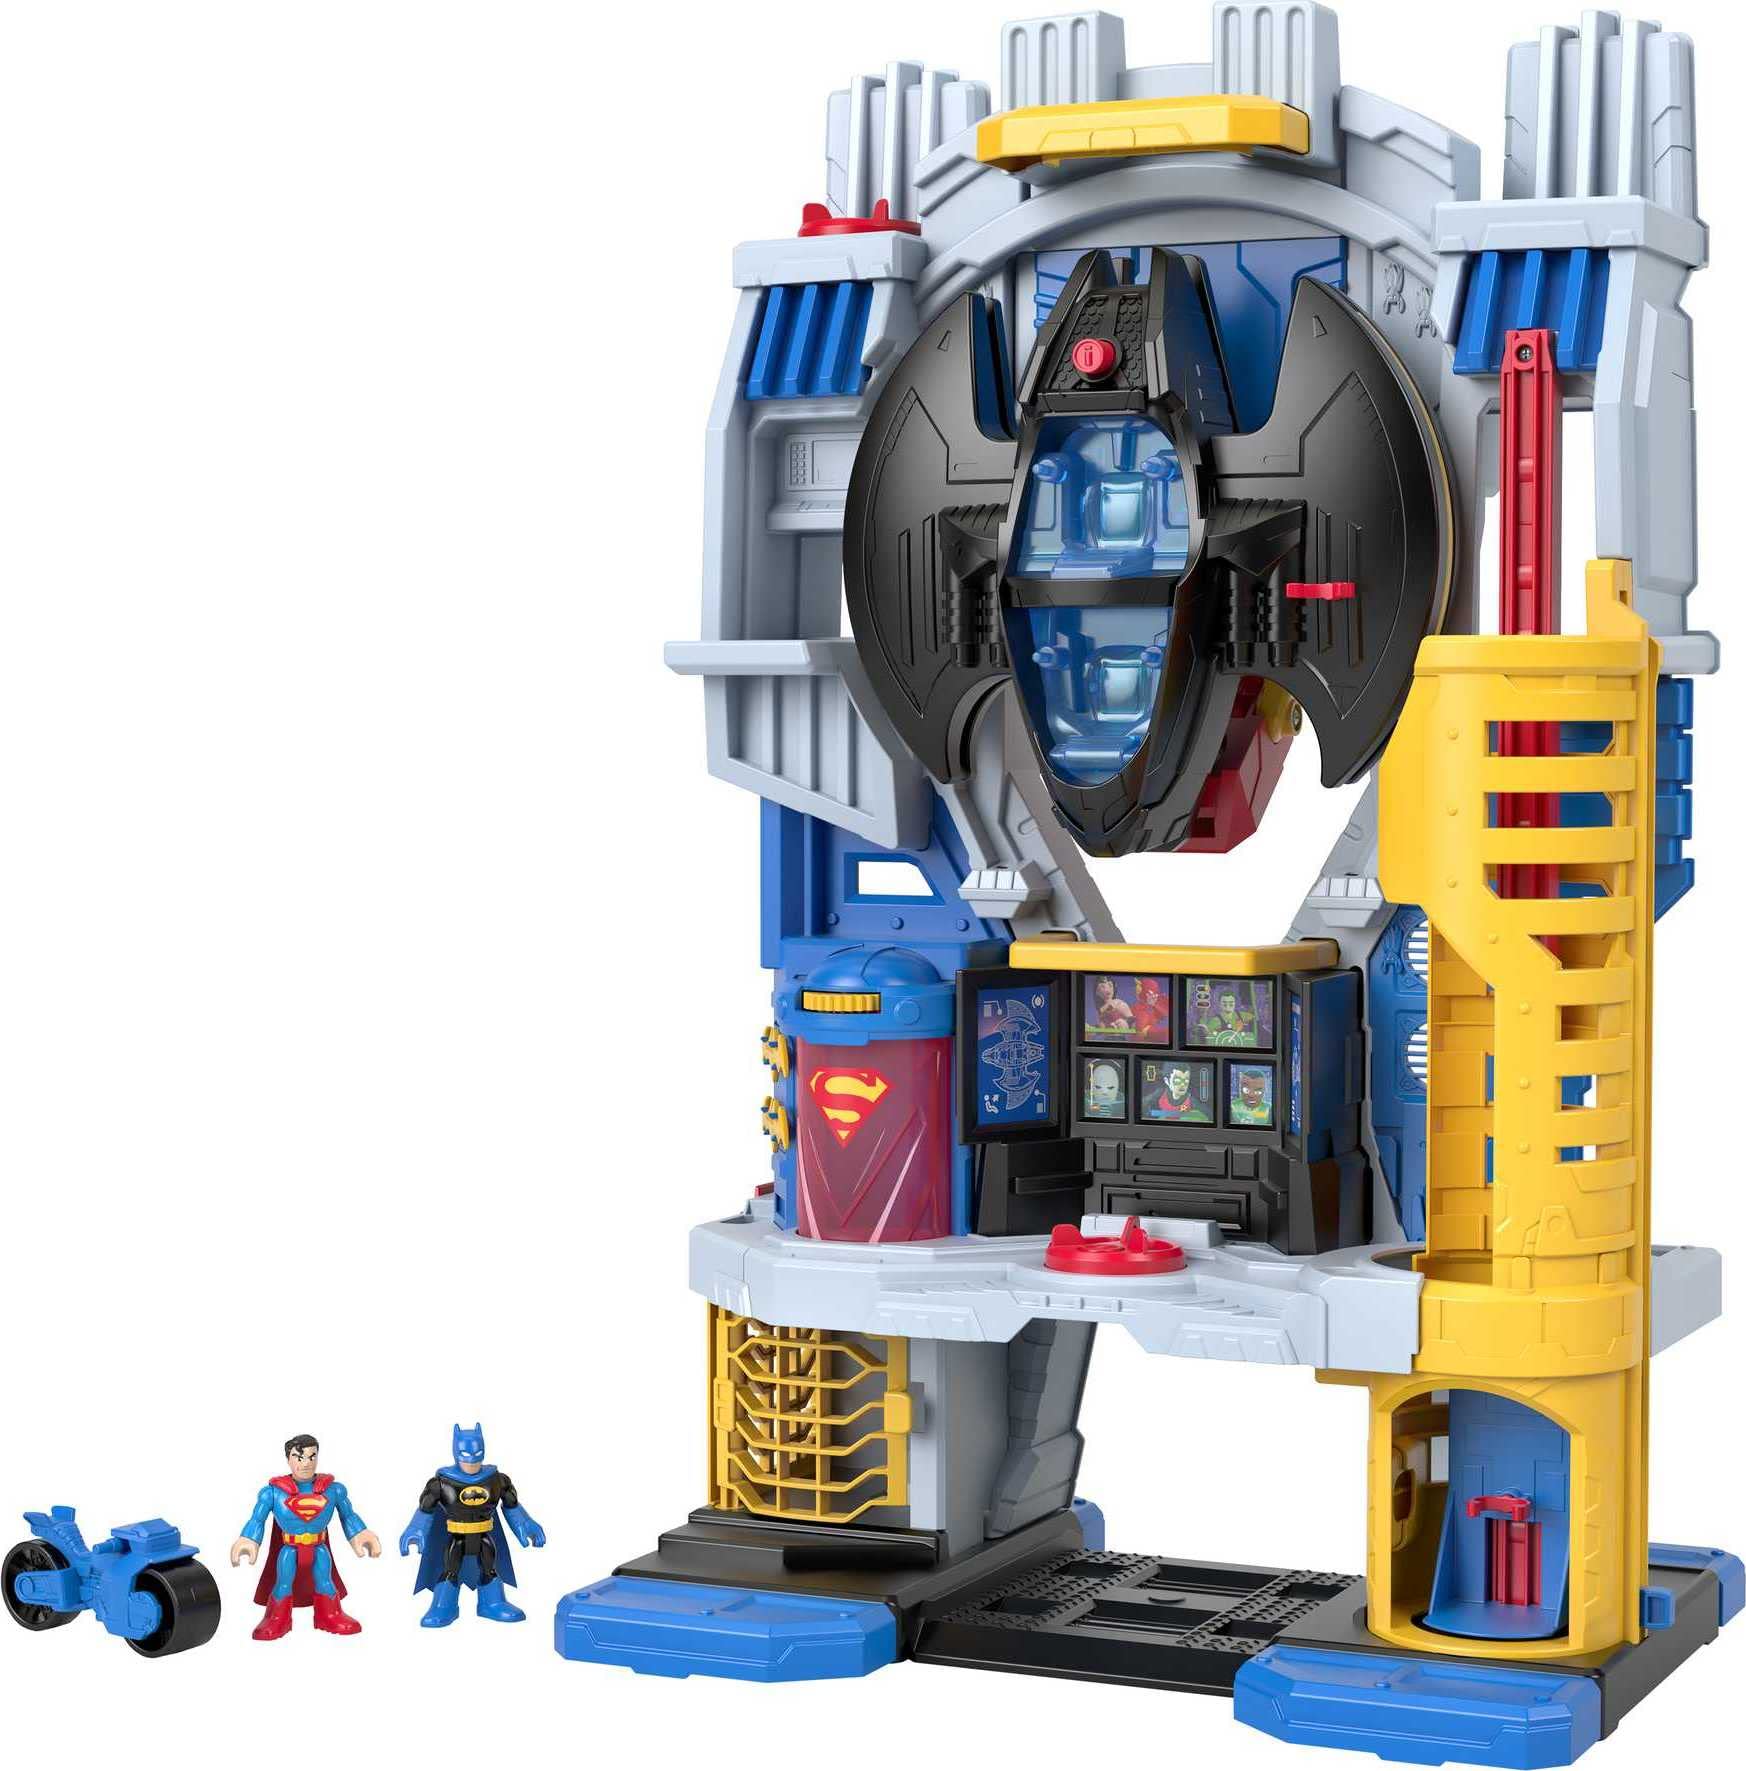 Imaginext DC Super Friends Batman Playset Ultimate Headquarters 2-Ft Tall with Lights Sounds Figures & Accessories for Ages 3+ Years